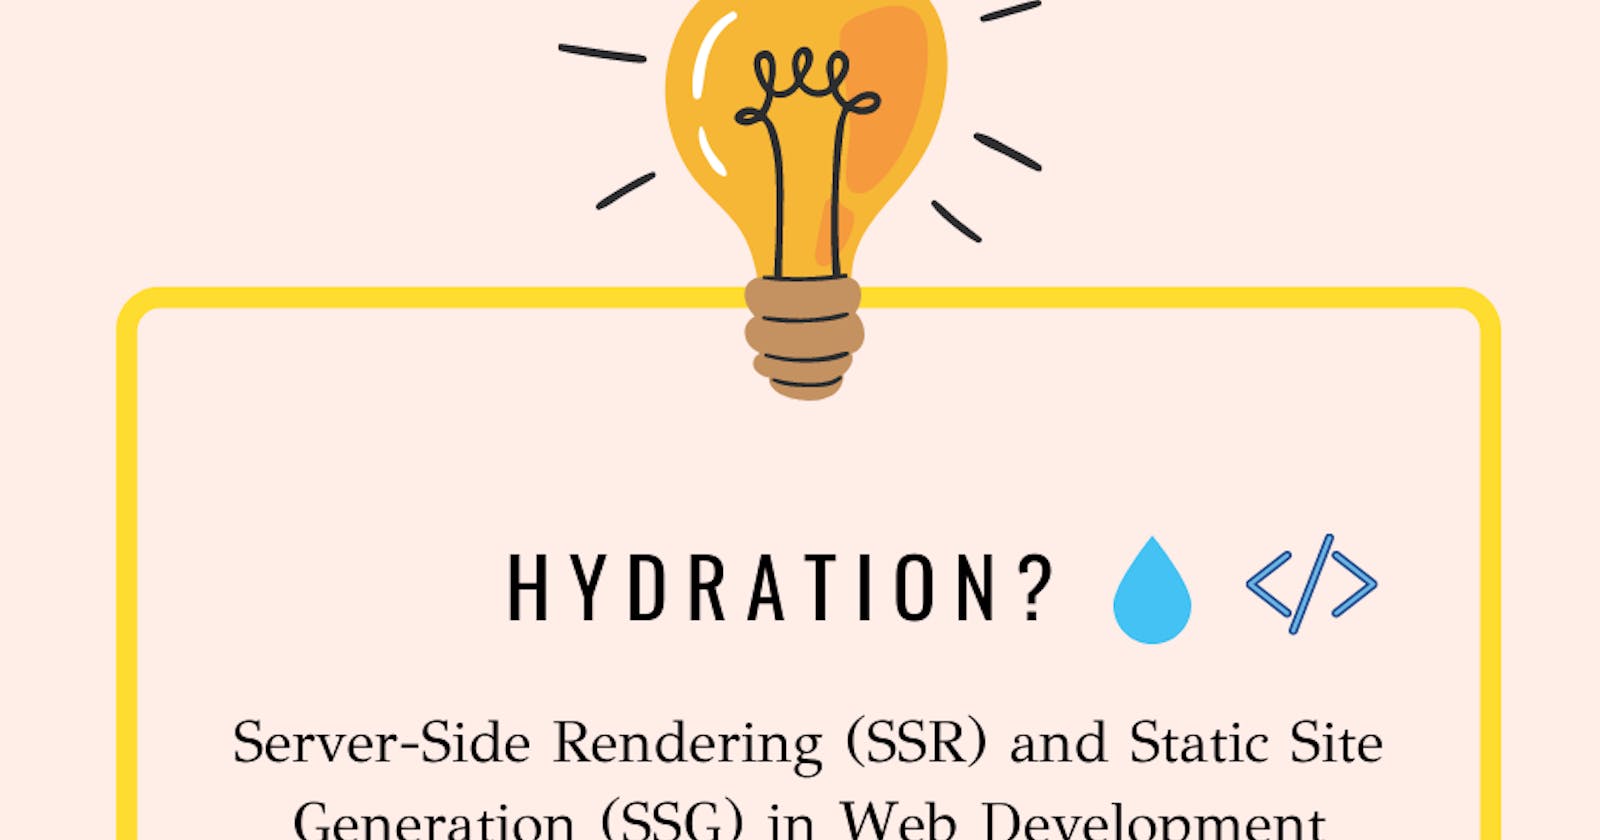 Hydration: Understanding the Role of Server-Side Rendering (SSR) and Static Site Generation (SSG) in Web Development